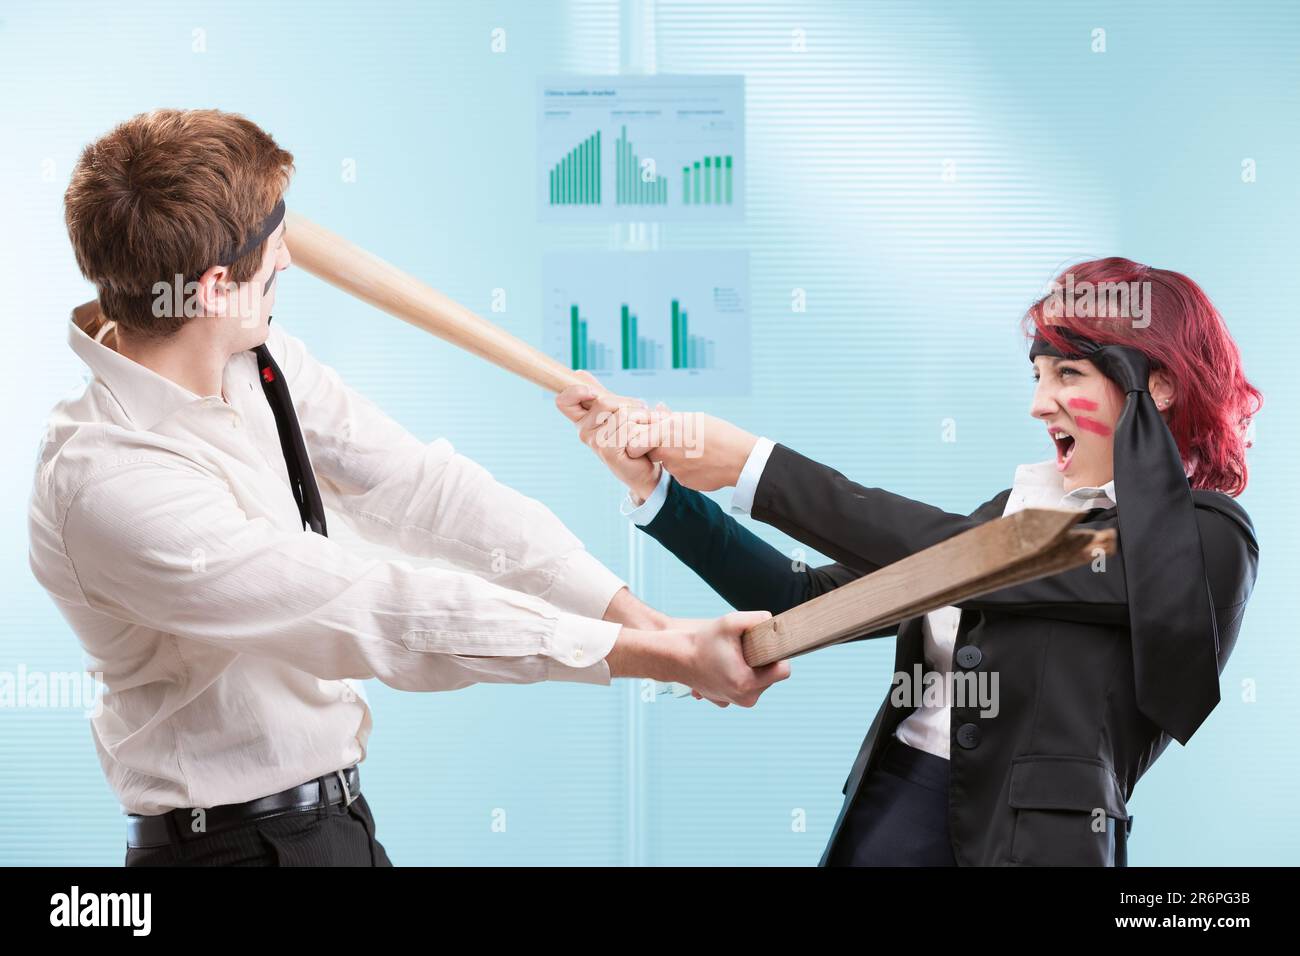 Employees using office furniture for a mock-battle. Business warriors or friendly fire in action? Stock Photo